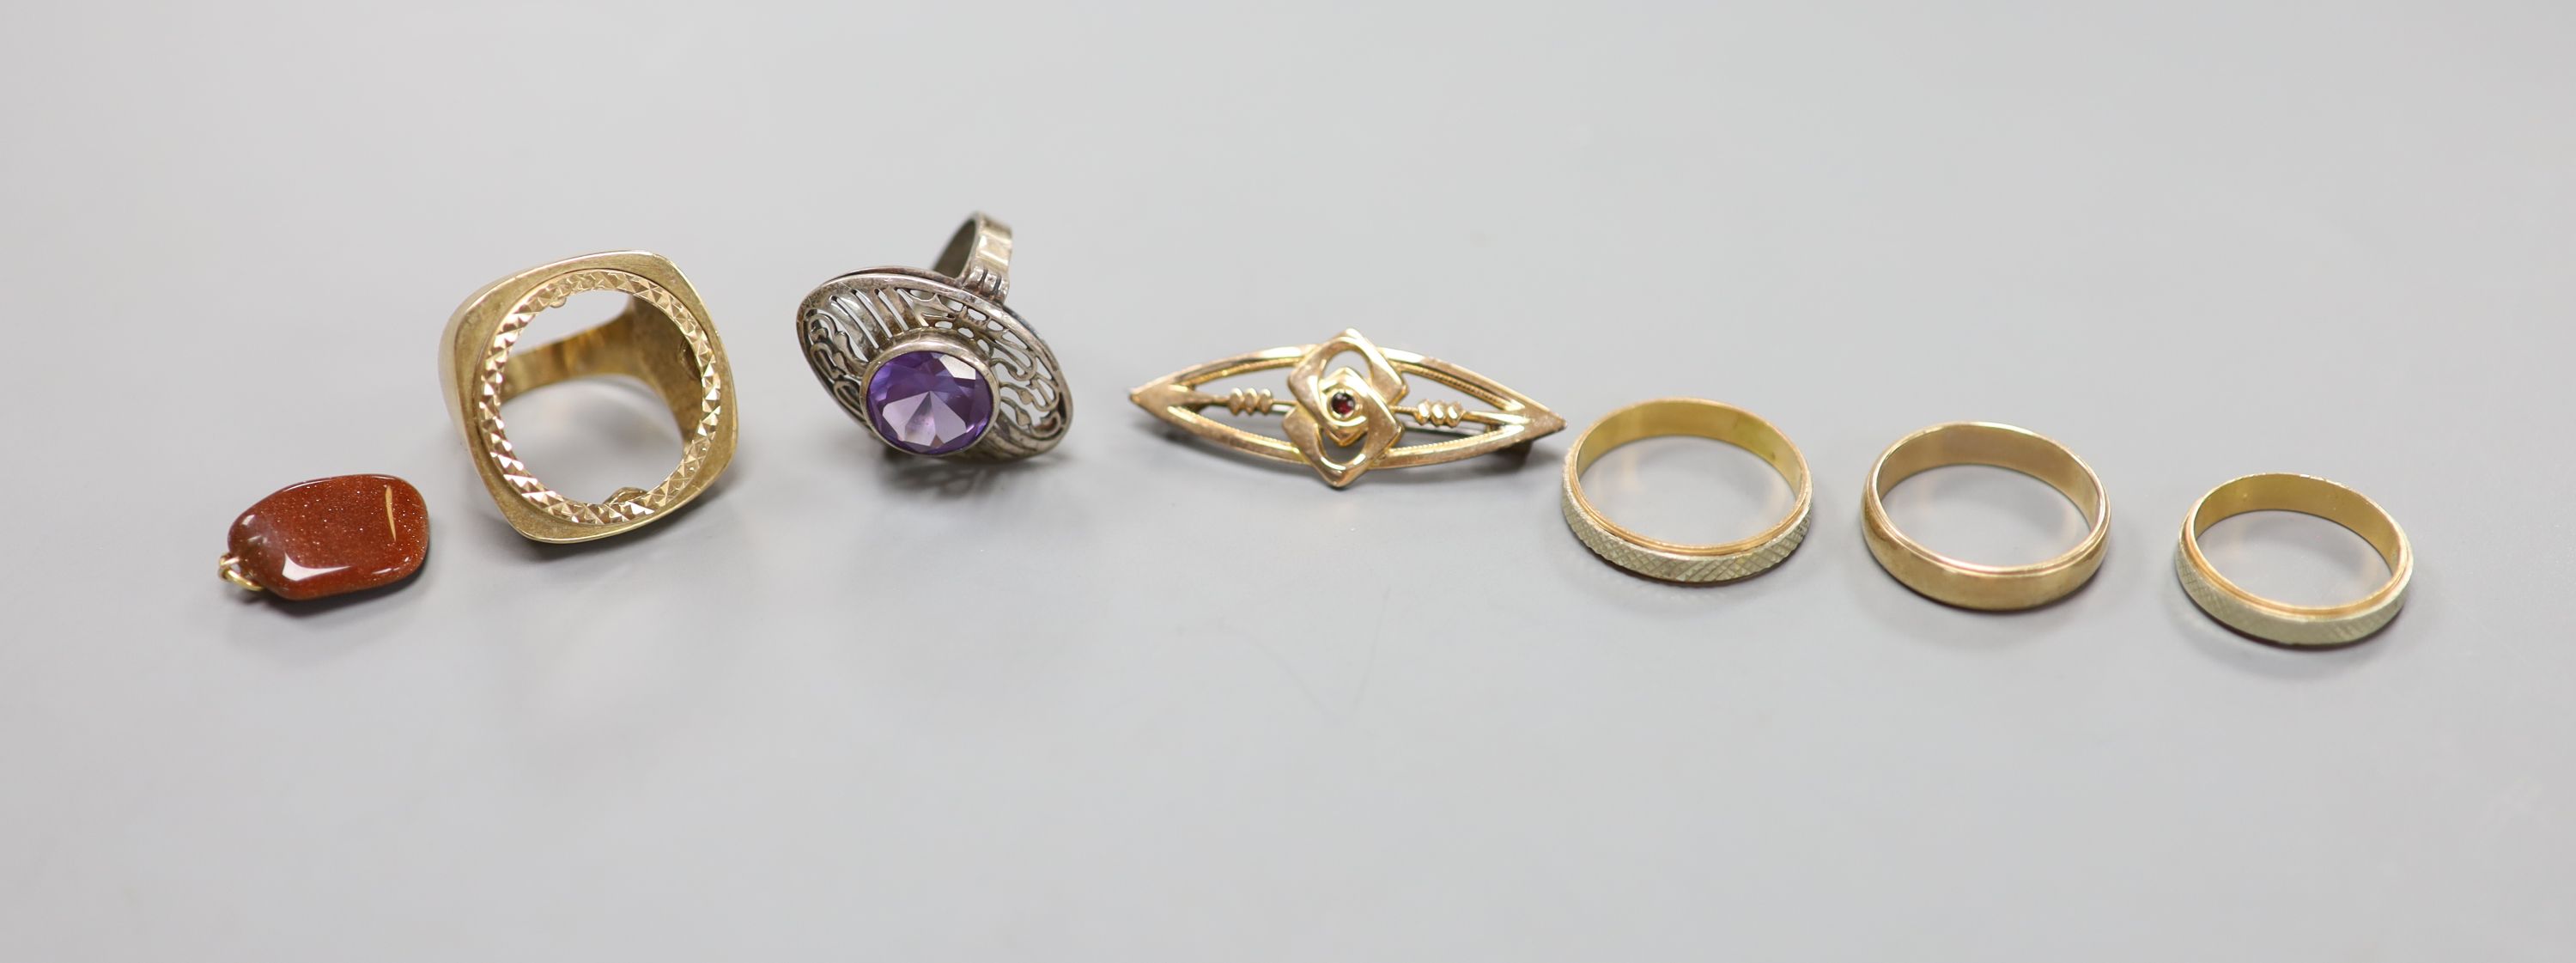 A 9ct gold shank, a 9ct band, three other rings, a brooch and a pendant